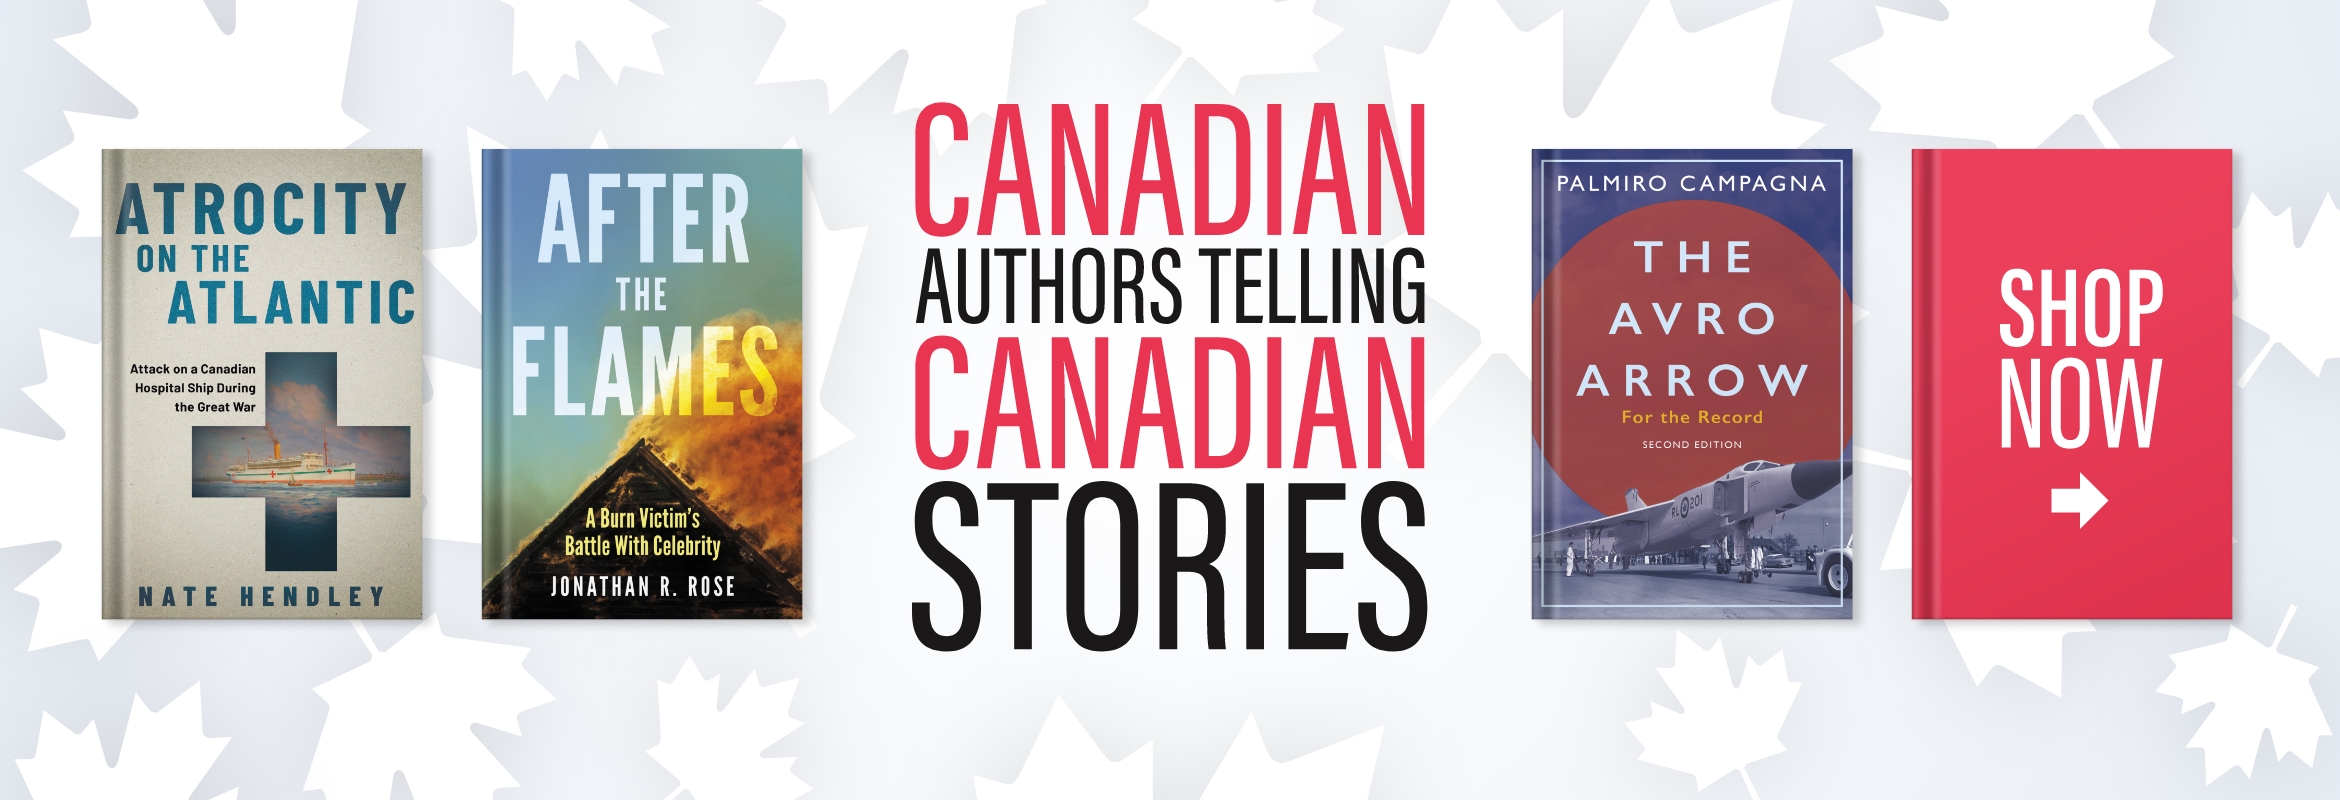 Canadian Authors Telling Canadian Stories